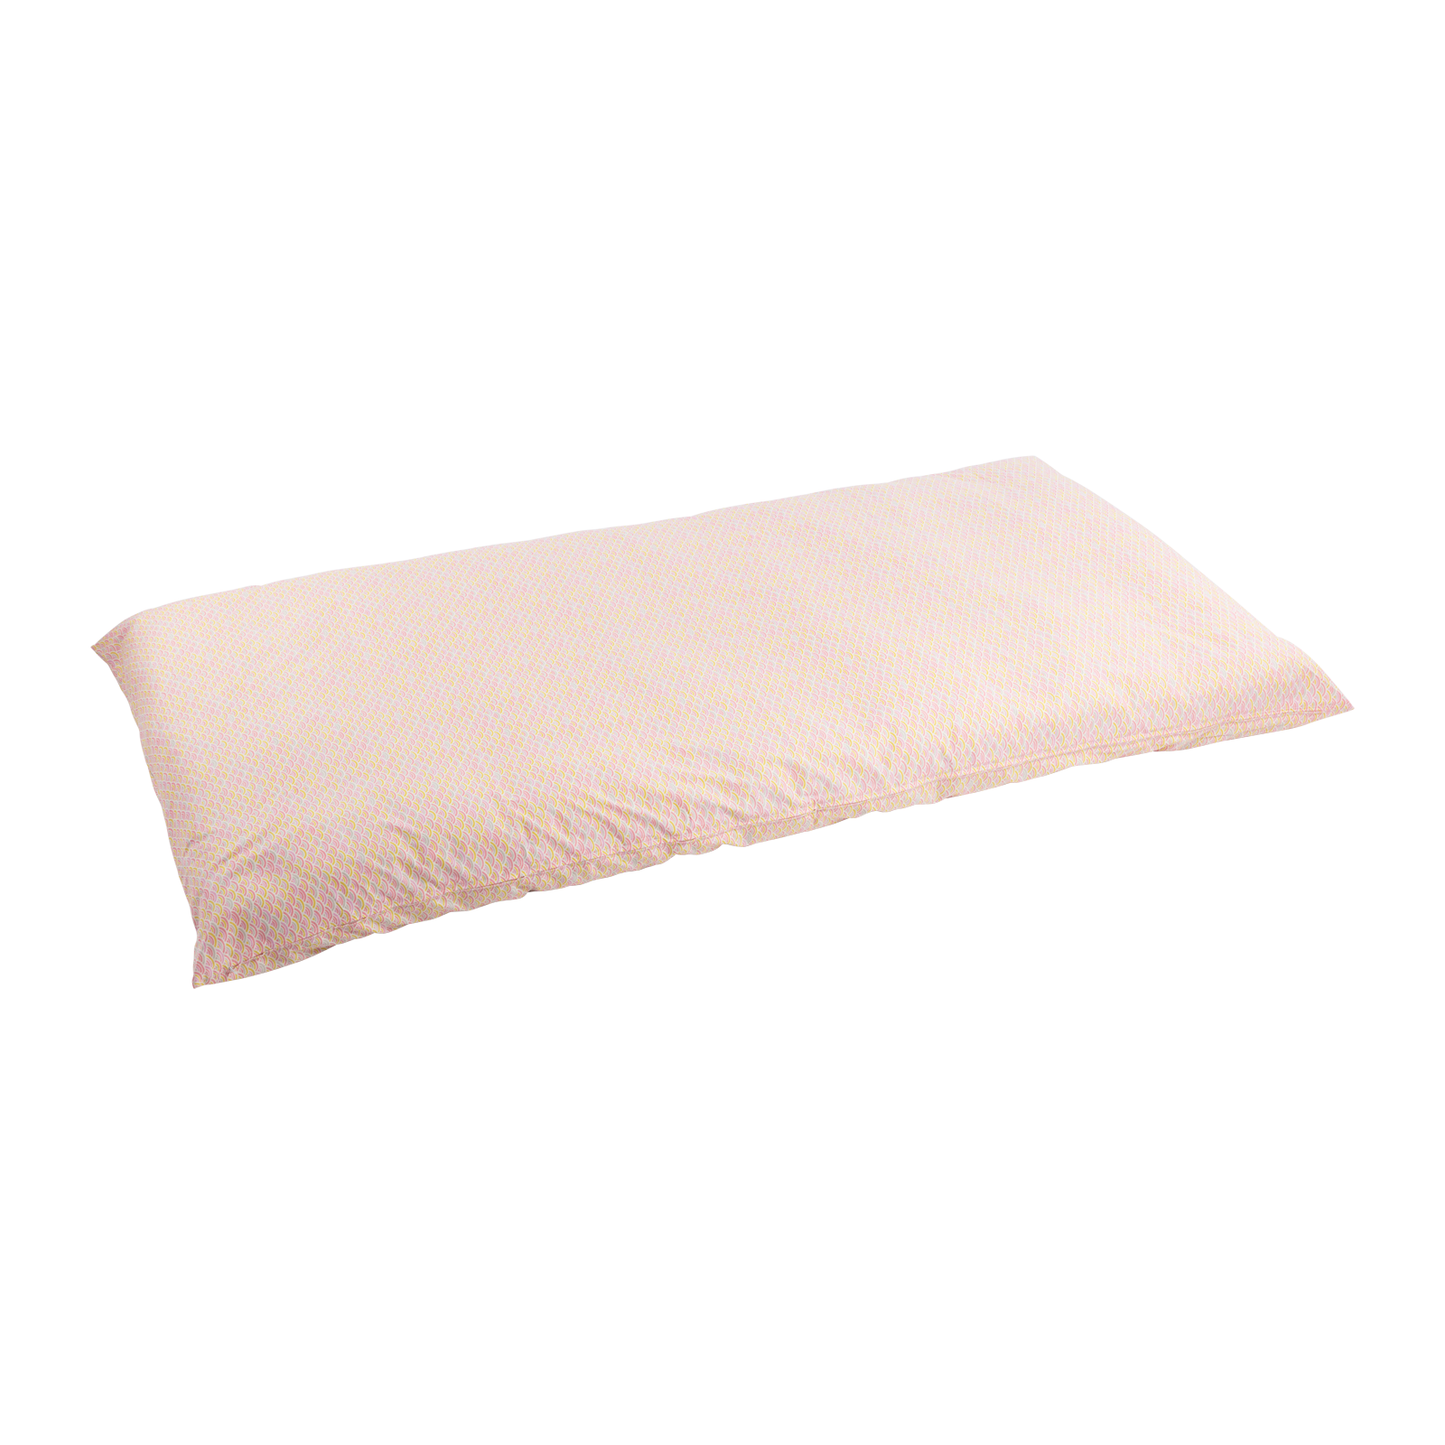 Shiki Futon Colorful Seika Ha Pink Removable COVER ONLY